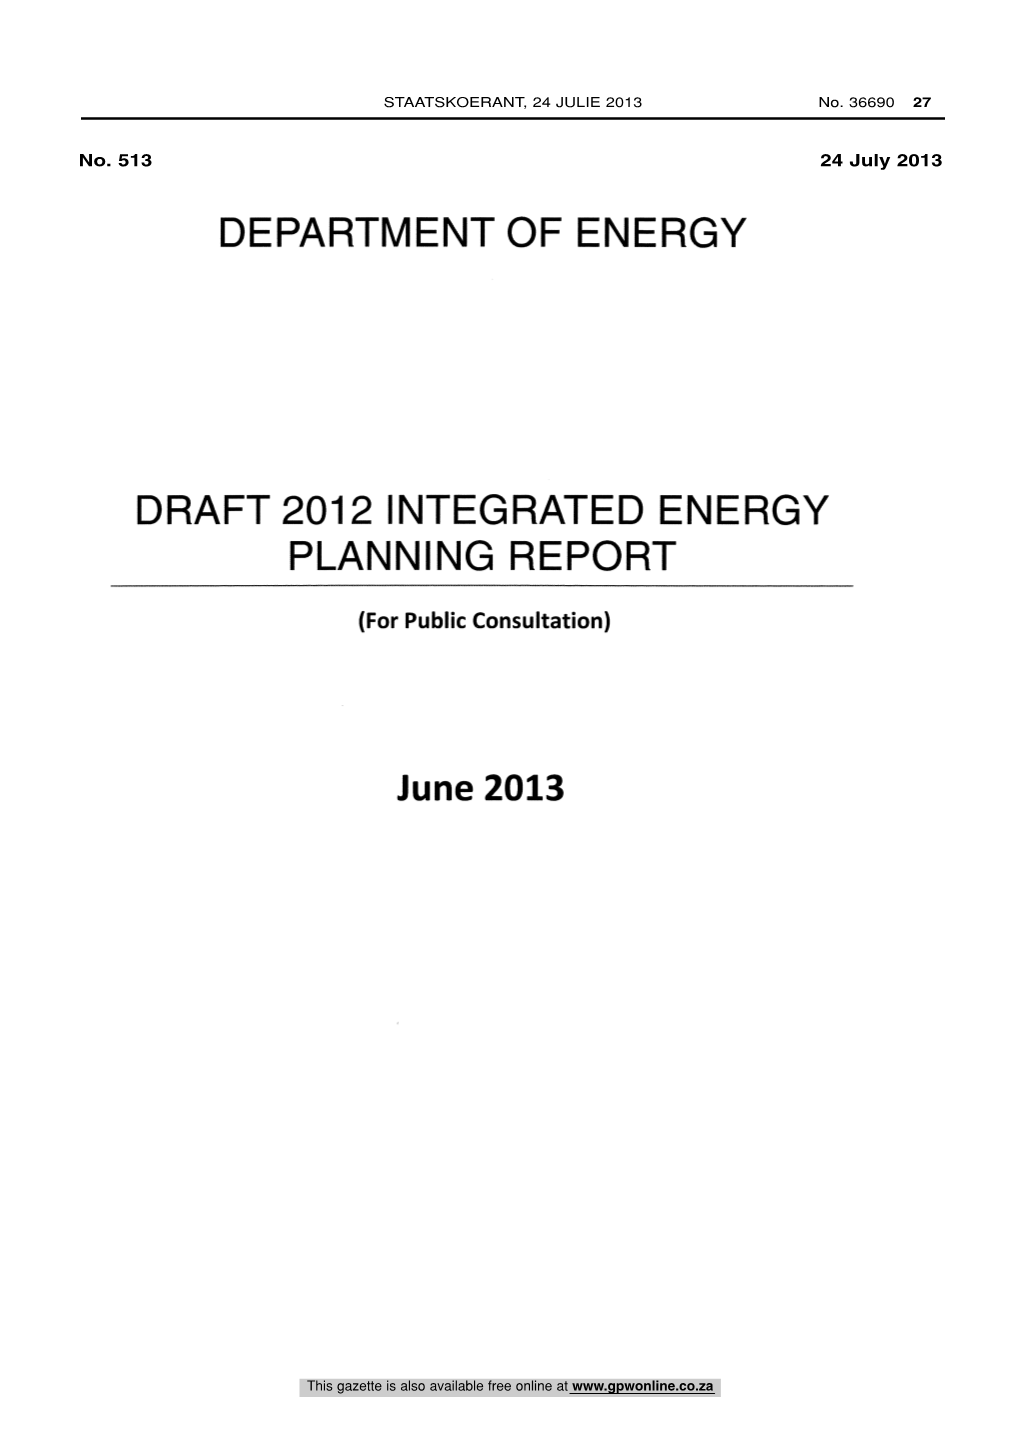 2012 Integrated Energy Planning Report